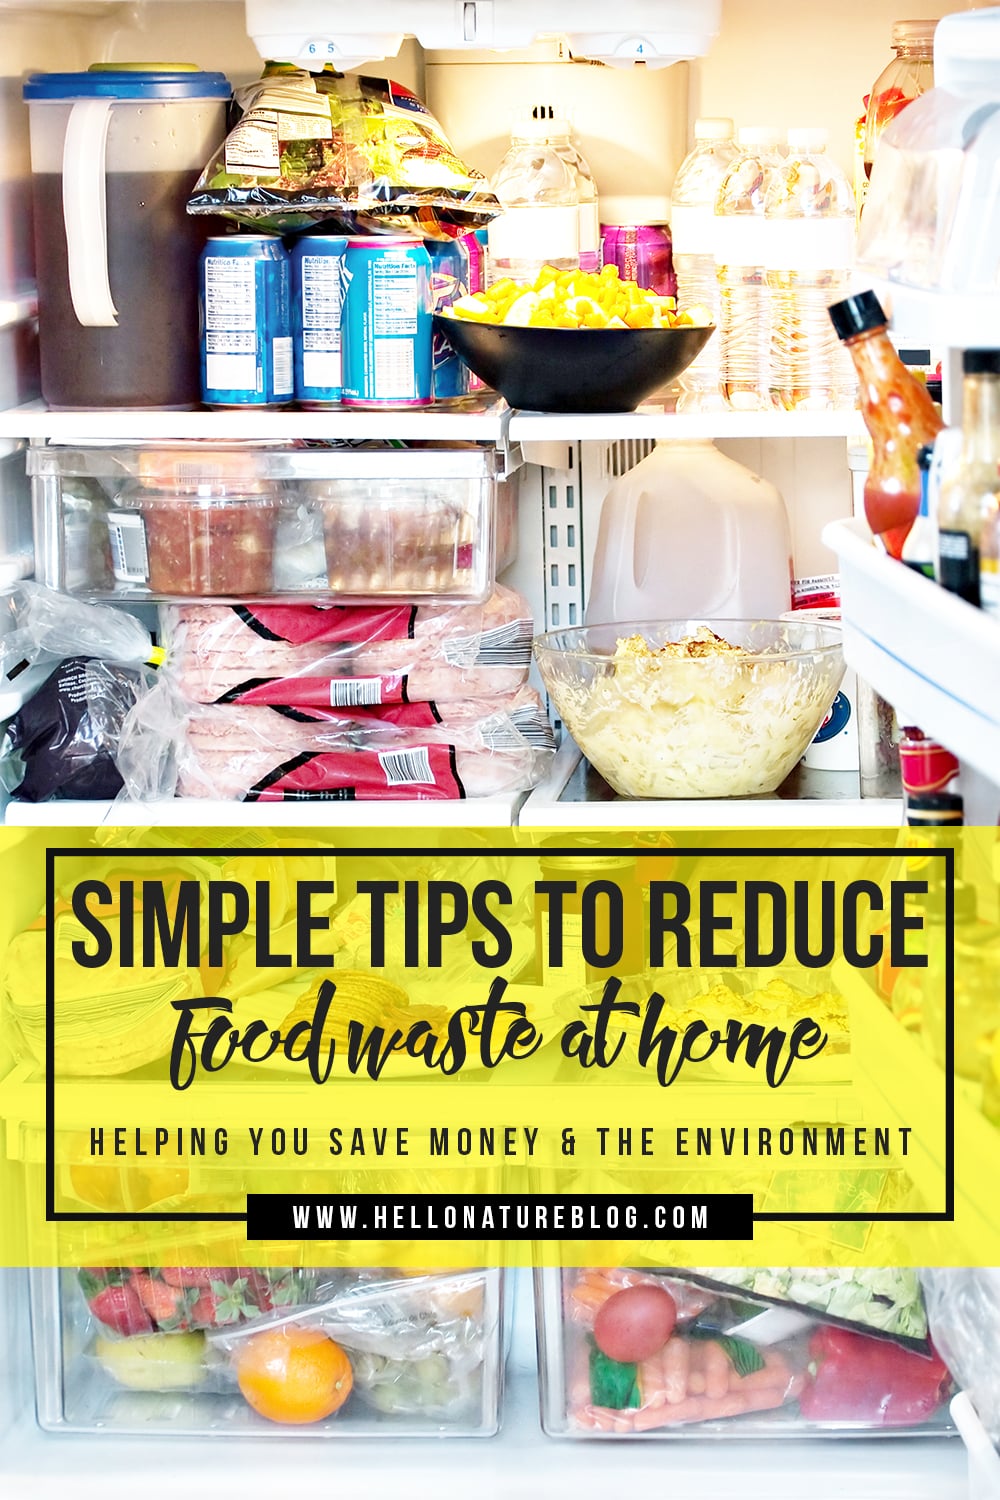 You could be throwing hundreds of dollars down the drain each year by throwing food away. Here are 9 simple tips on how to reduce food waste at home. Your wallet and the environment will thank you.